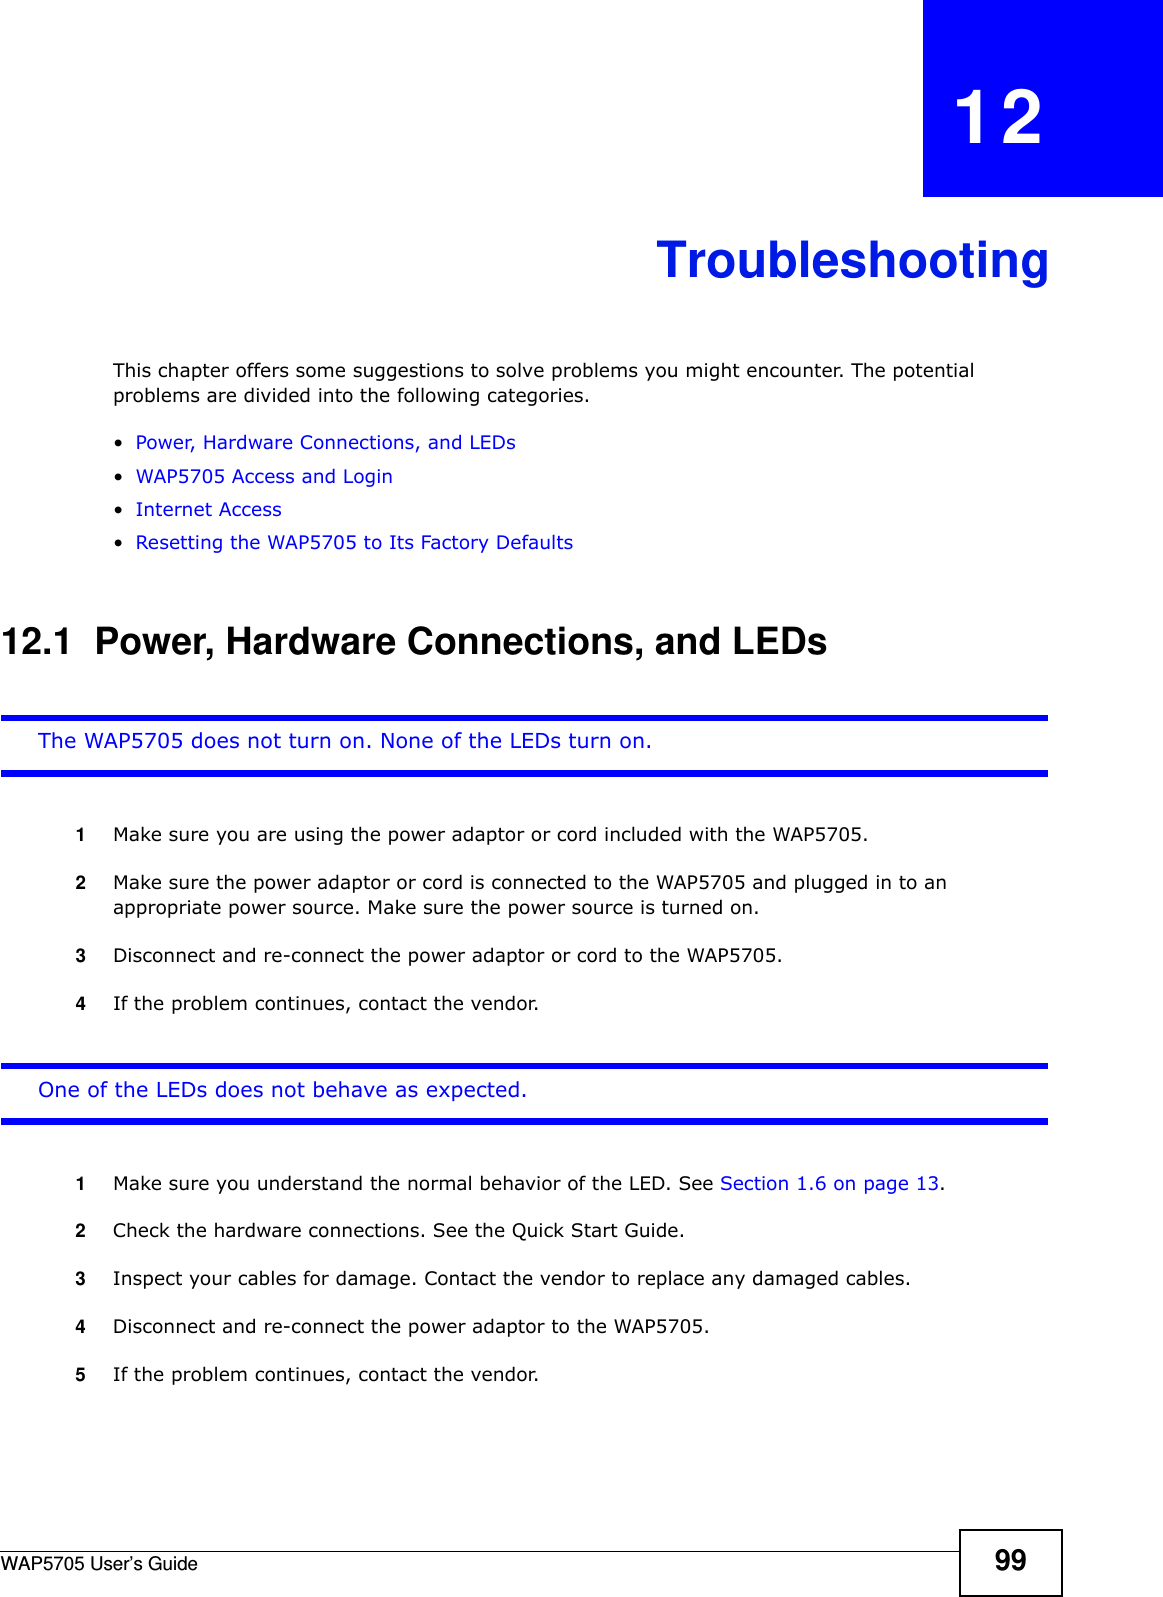 WAP5705 User’s Guide 99CHAPTER   12TroubleshootingThis chapter offers some suggestions to solve problems you might encounter. The potential problems are divided into the following categories. •Power, Hardware Connections, and LEDs•WAP5705 Access and Login•Internet Access•Resetting the WAP5705 to Its Factory Defaults12.1  Power, Hardware Connections, and LEDsThe WAP5705 does not turn on. None of the LEDs turn on.1Make sure you are using the power adaptor or cord included with the WAP5705.2Make sure the power adaptor or cord is connected to the WAP5705 and plugged in to an appropriate power source. Make sure the power source is turned on.3Disconnect and re-connect the power adaptor or cord to the WAP5705.4If the problem continues, contact the vendor.One of the LEDs does not behave as expected.1Make sure you understand the normal behavior of the LED. See Section 1.6 on page 13.2Check the hardware connections. See the Quick Start Guide. 3Inspect your cables for damage. Contact the vendor to replace any damaged cables.4Disconnect and re-connect the power adaptor to the WAP5705. 5If the problem continues, contact the vendor.